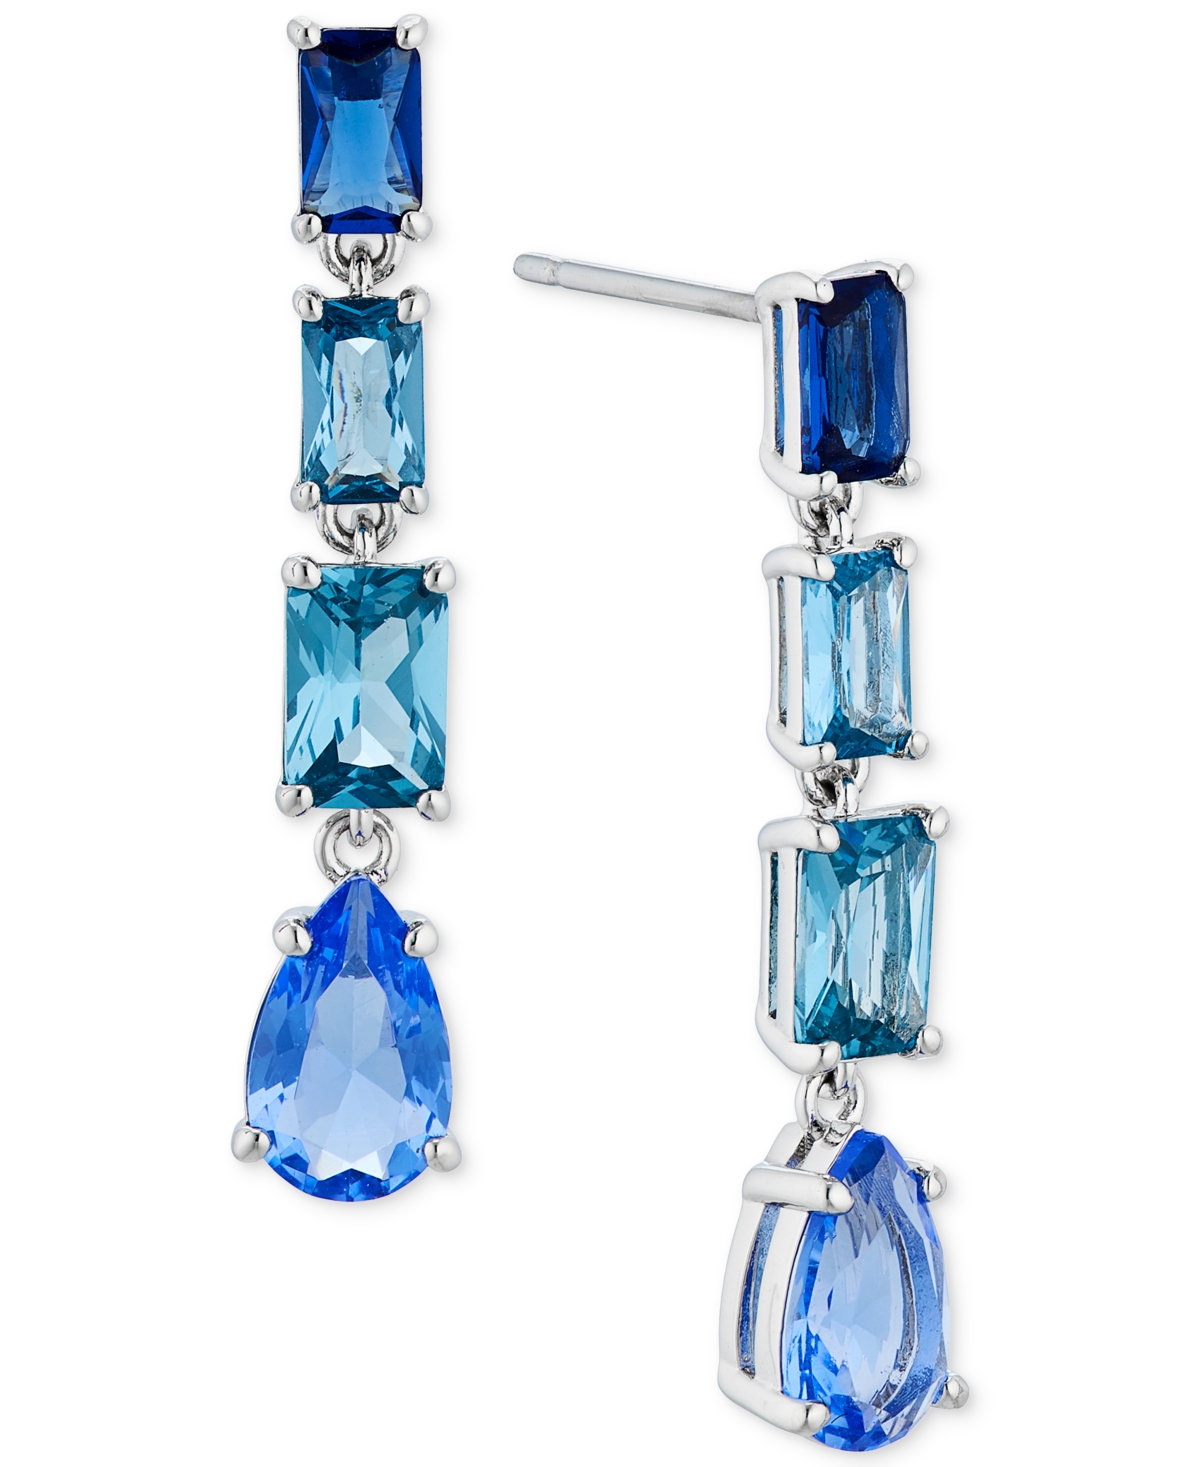 Eliot Danori Silver-tone Mixed Crystal Linear Drop Earrings, Created For Macy's In Blue